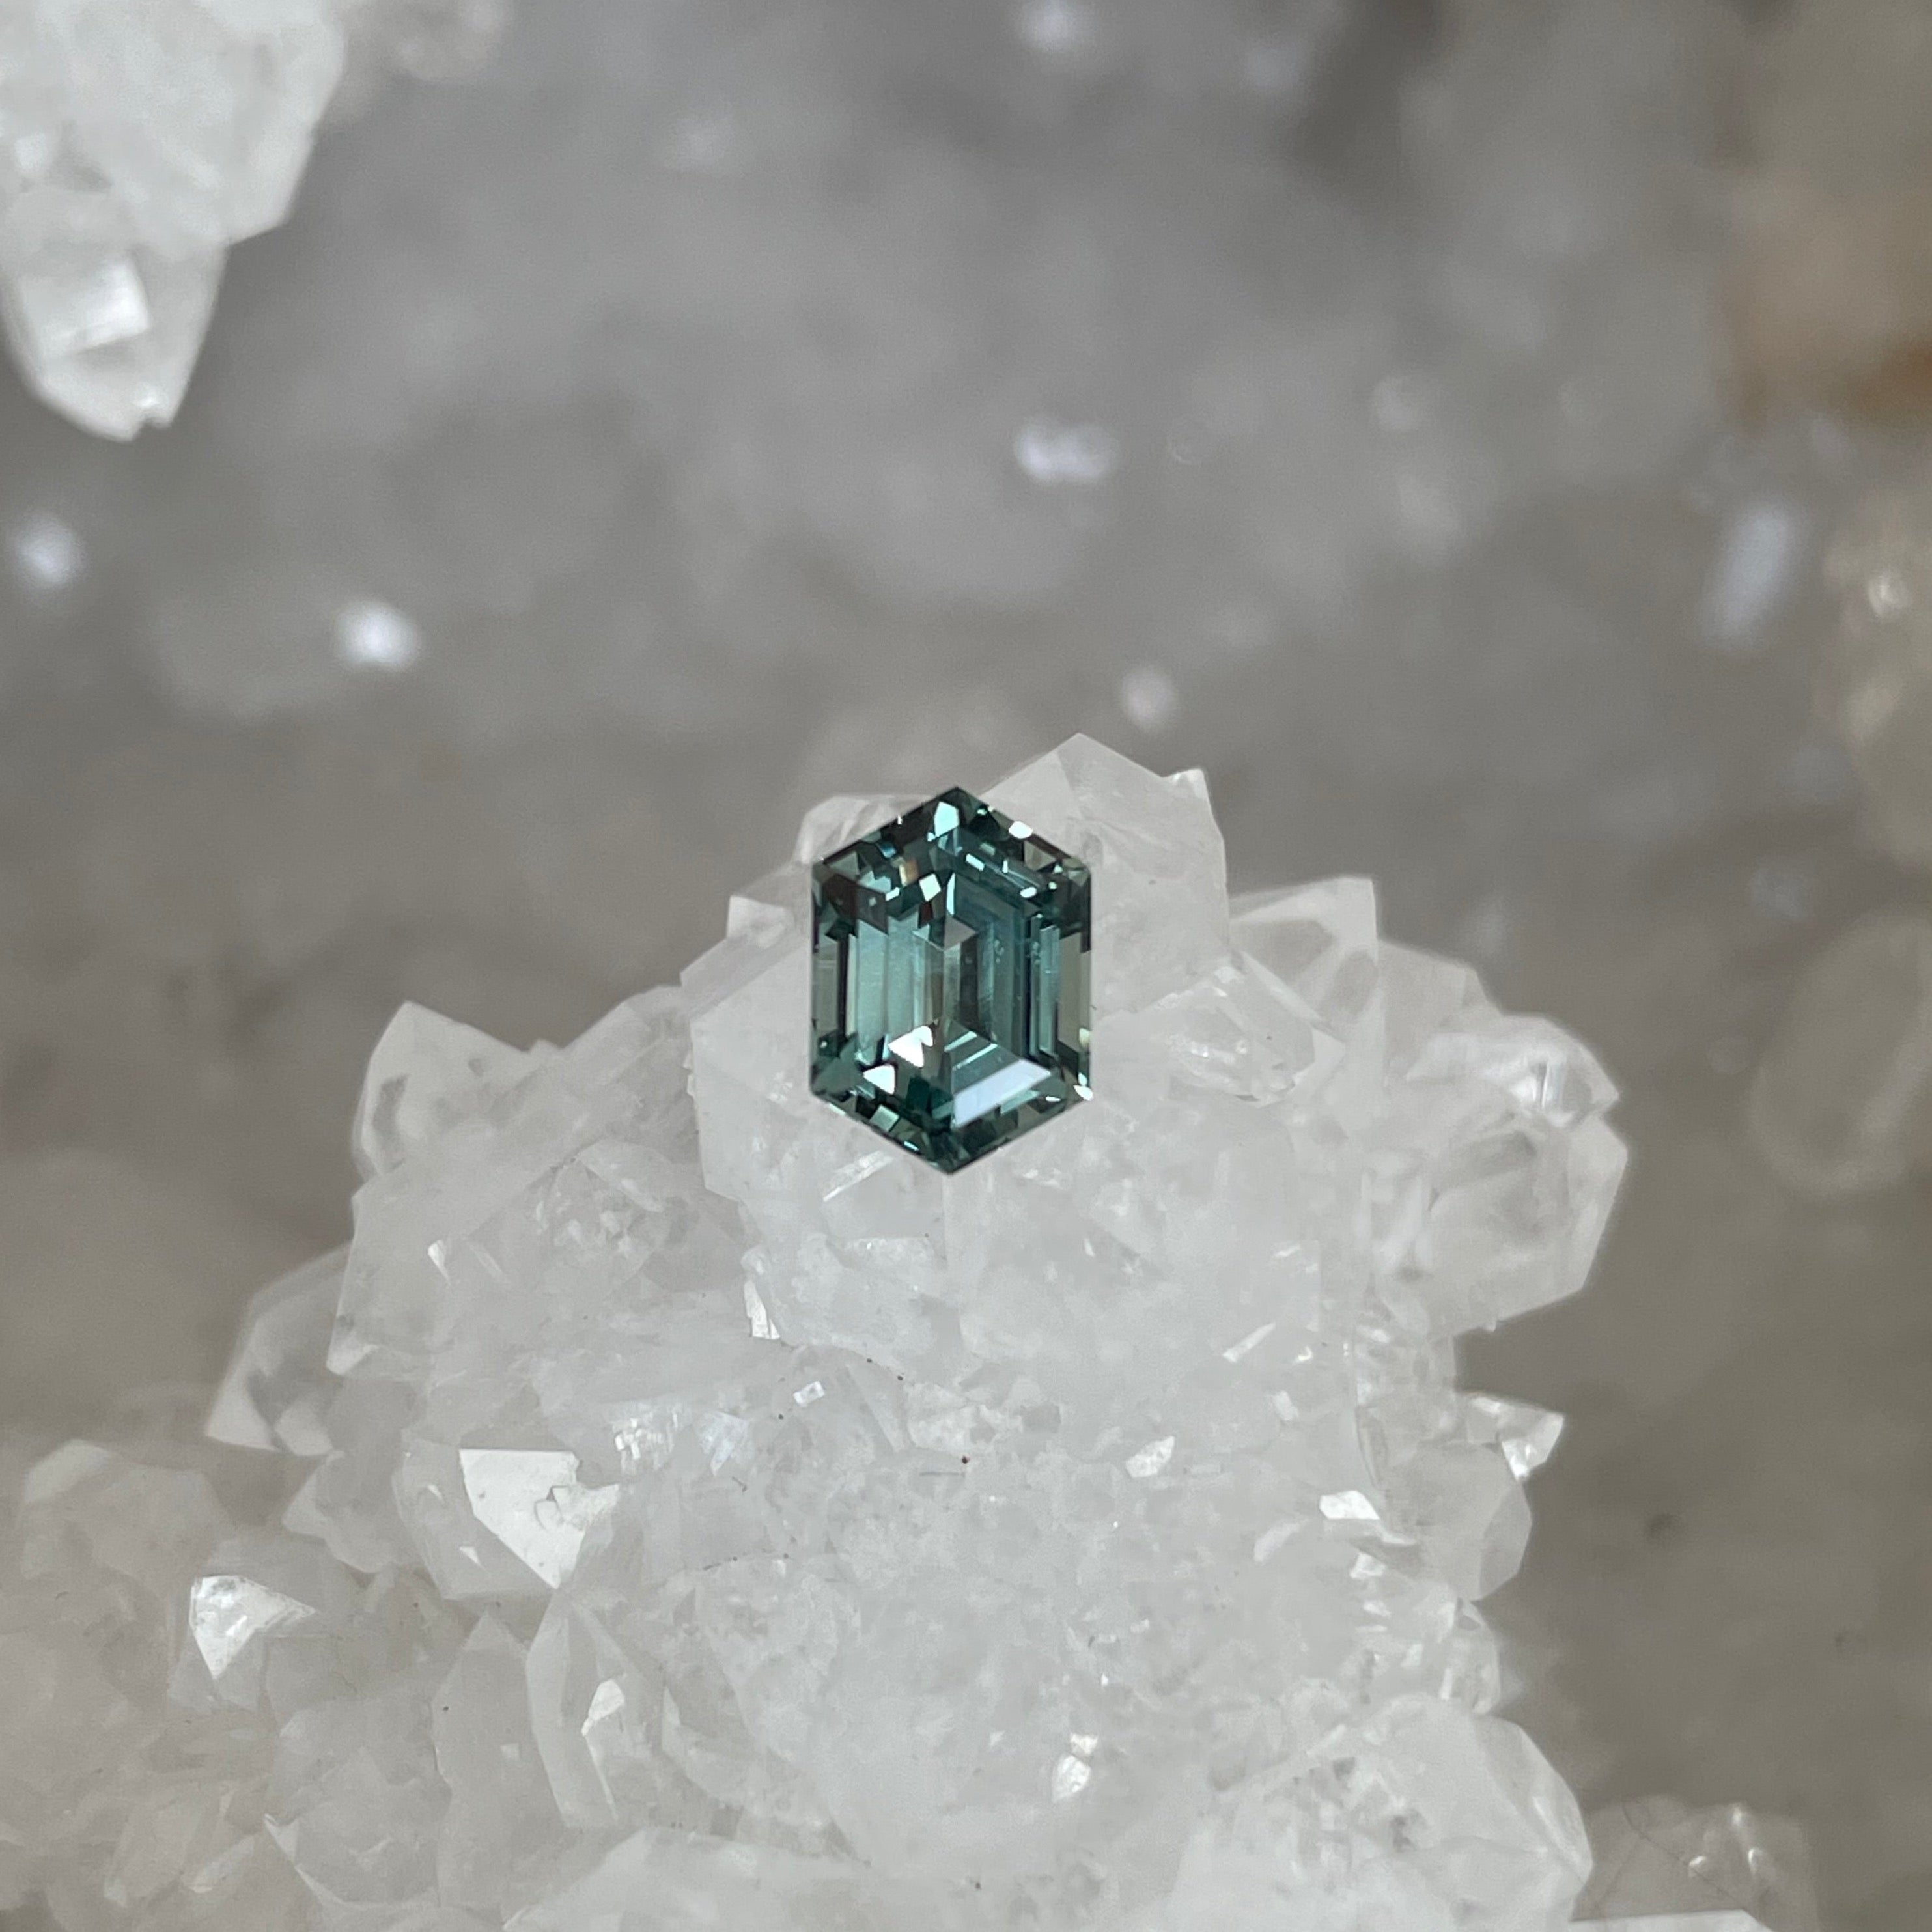 Montana Sapphire 1.42 CT Light Teal to Grass or Sage Green Stretched Hexagon